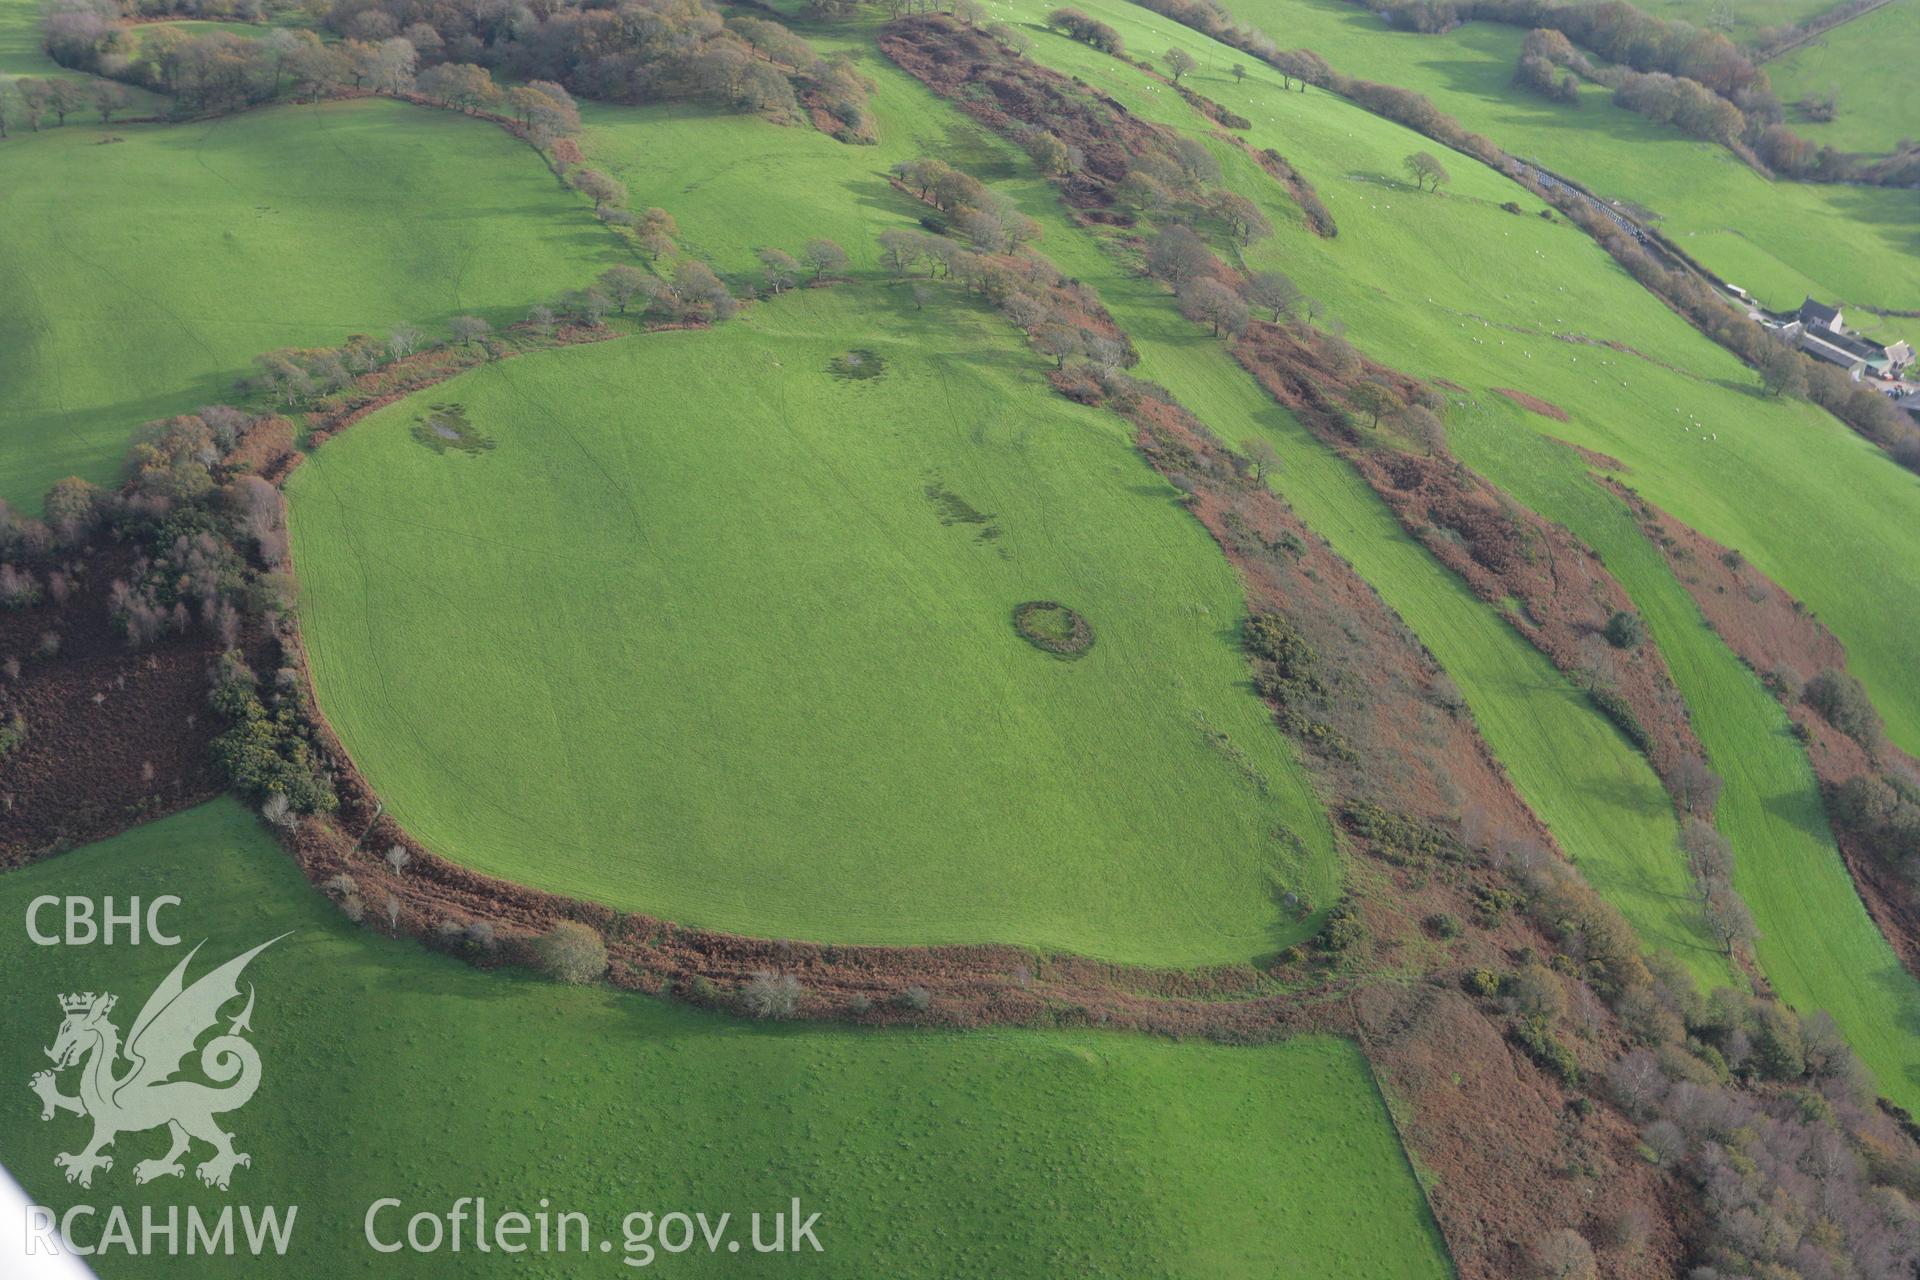 RCAHMW colour oblique photograph of Caerau Hillfort, Rhiwsaeson, Llantrisant. Taken by Toby Driver on 17/11/2011.